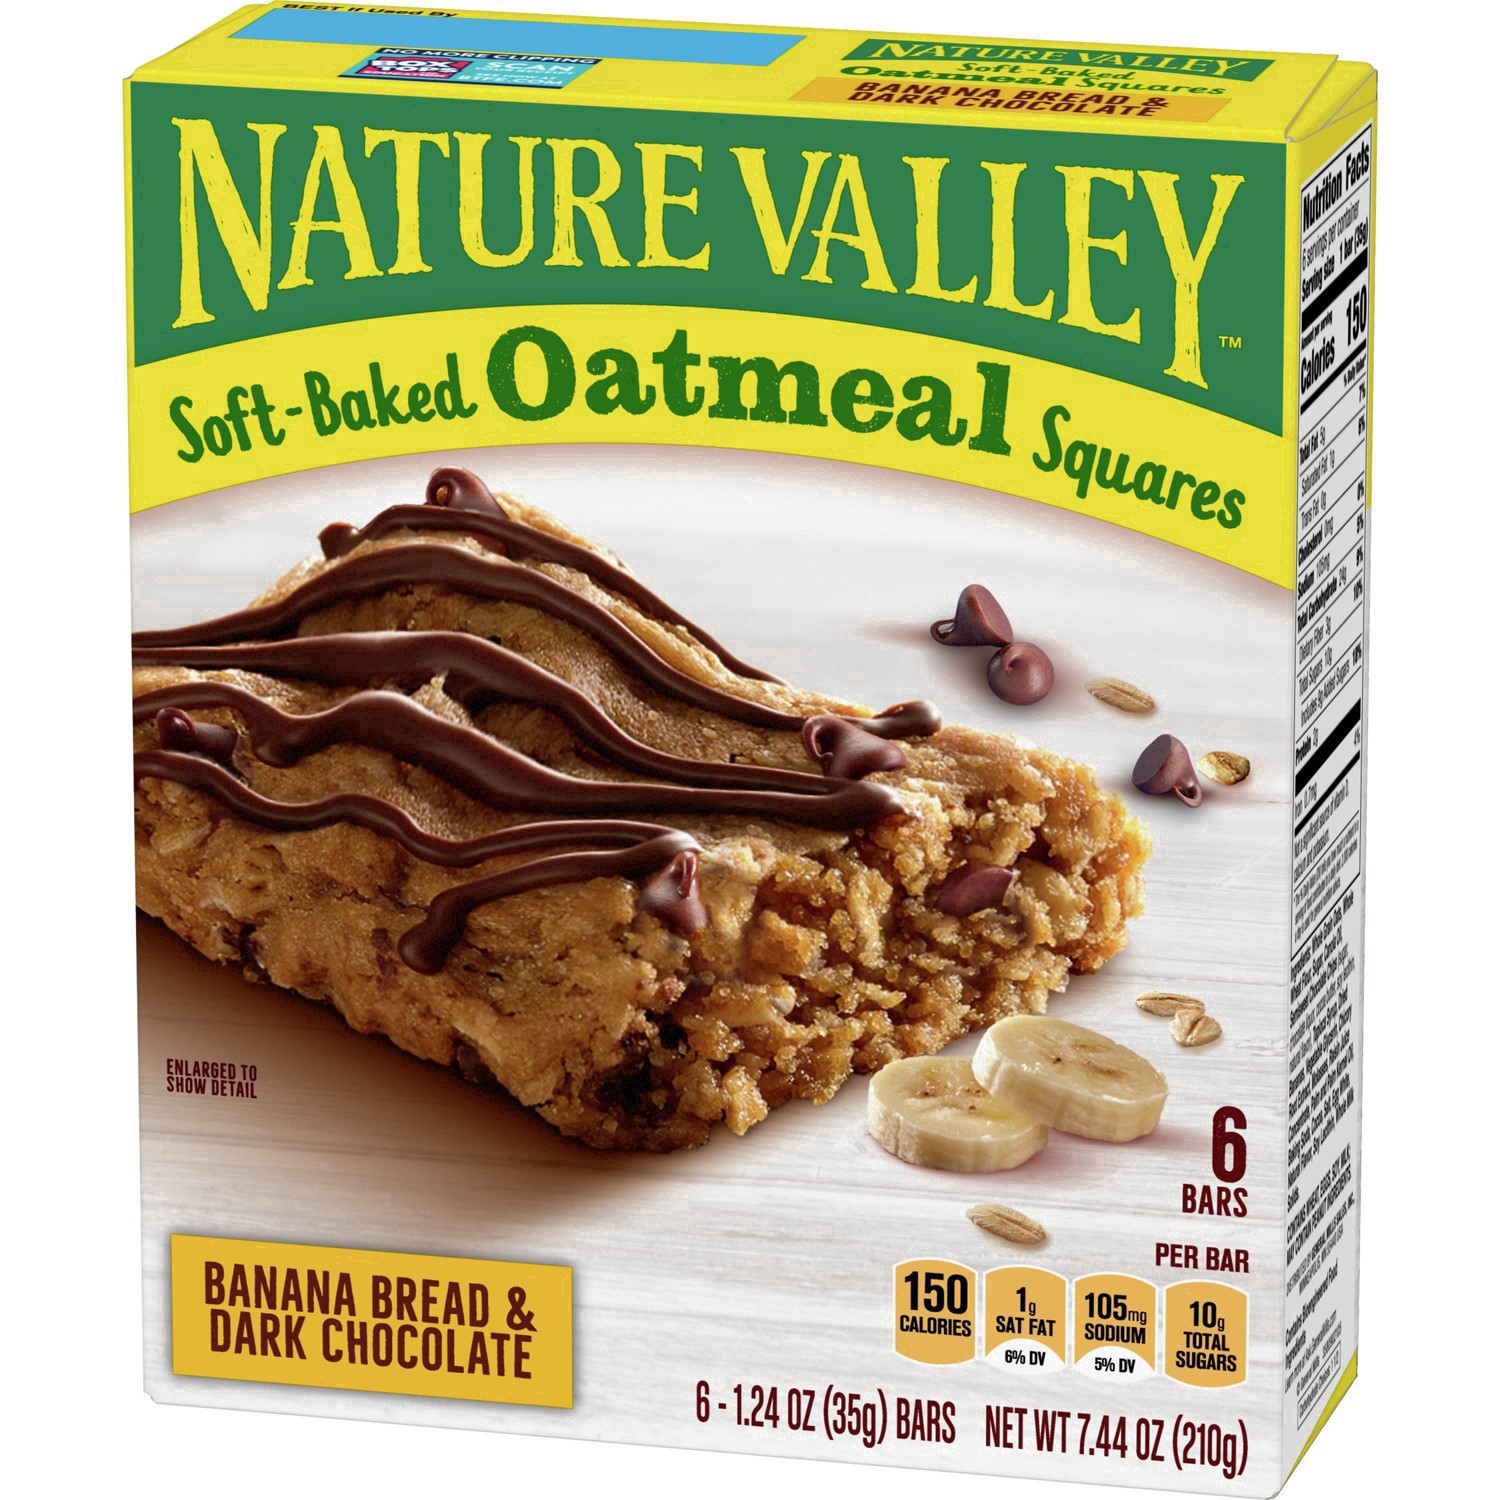 slide 10 of 101, Nature Valley Soft-Baked Oatmeal Squares, Banana Bread & Dark Chocolate, 6 ct, 6 ct